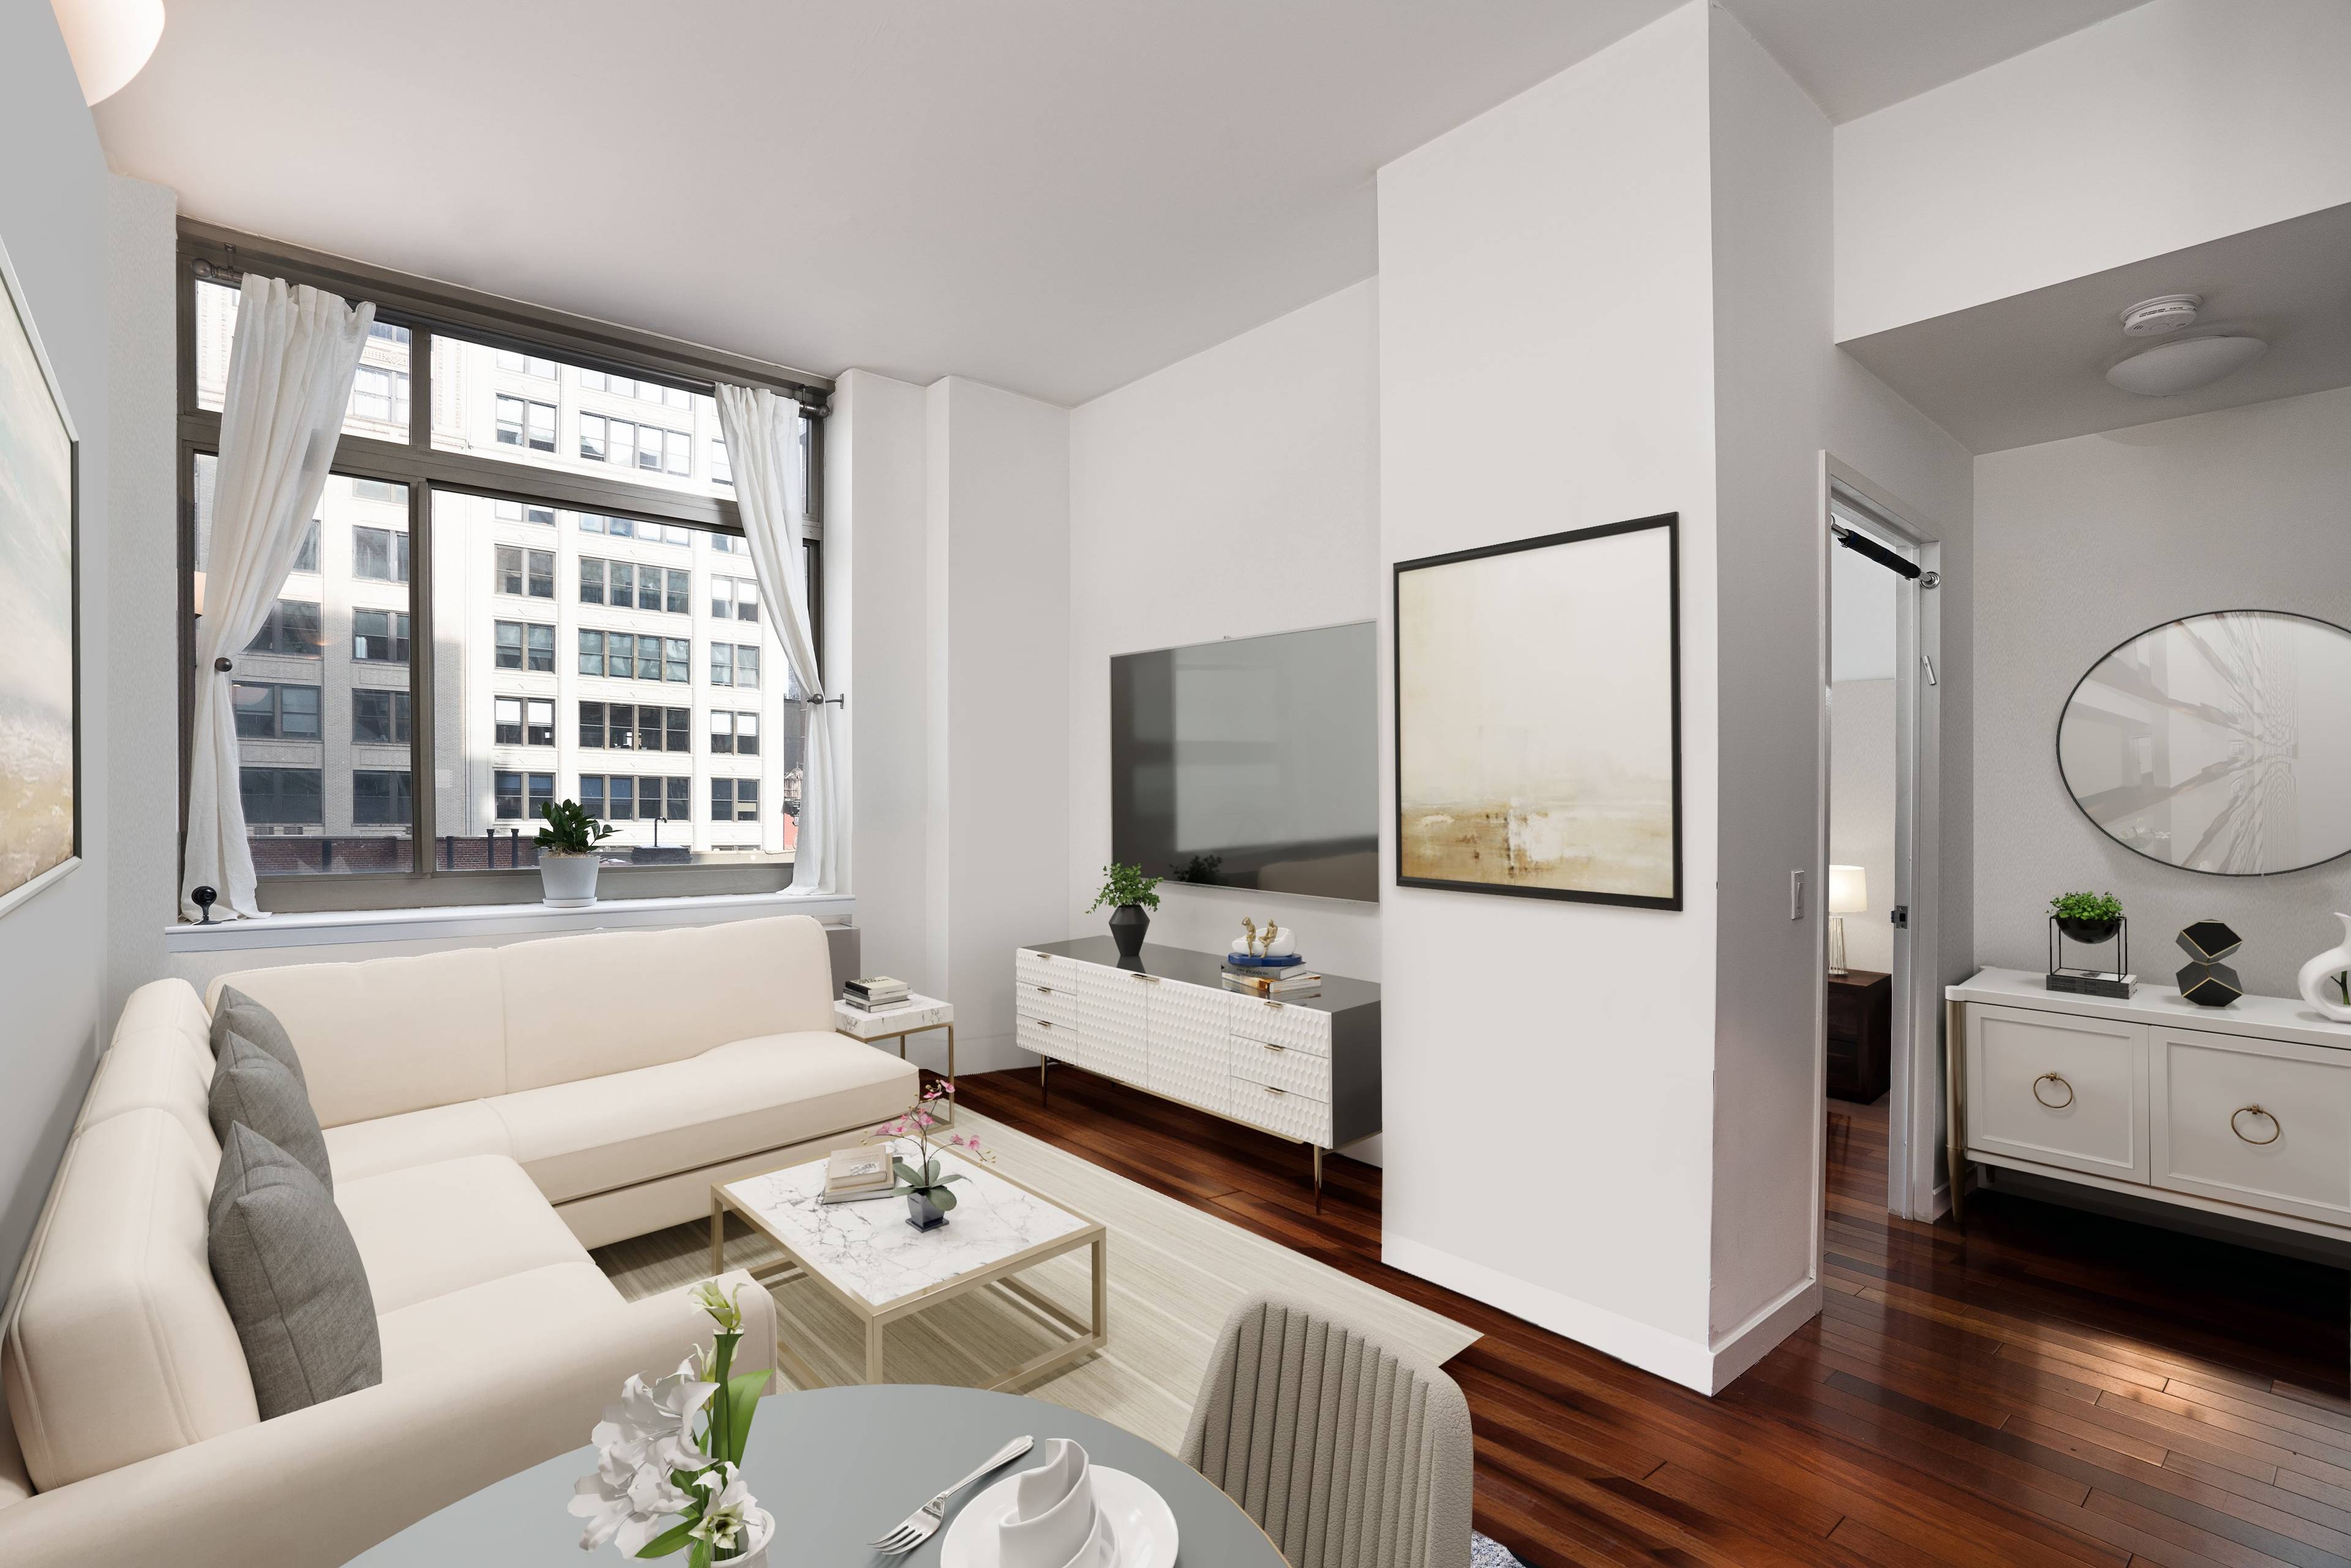 Located in the prestigious neighborhoods of Gramercy Park and Flatiron, this exceptional true one bedroom apartment within a condo building offers a rare opportunity to embrace spacious, stylish living amidst ...